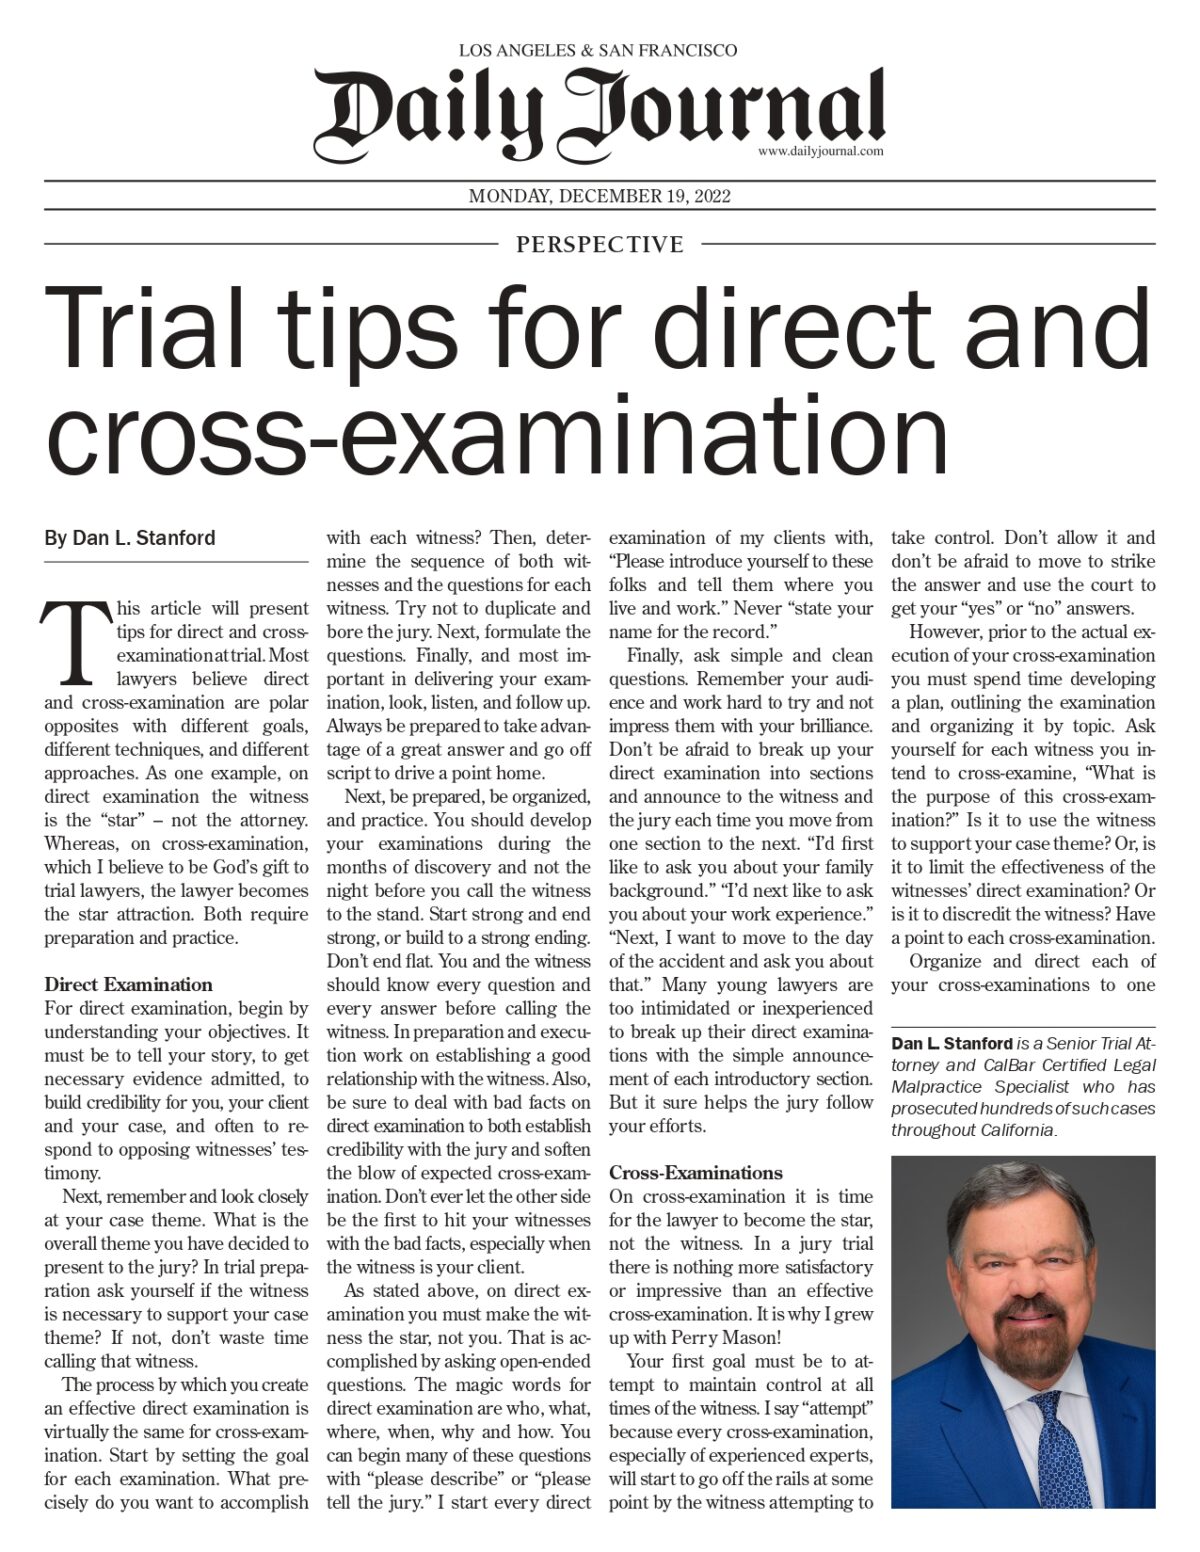 Trial tips for direct and cross-examination